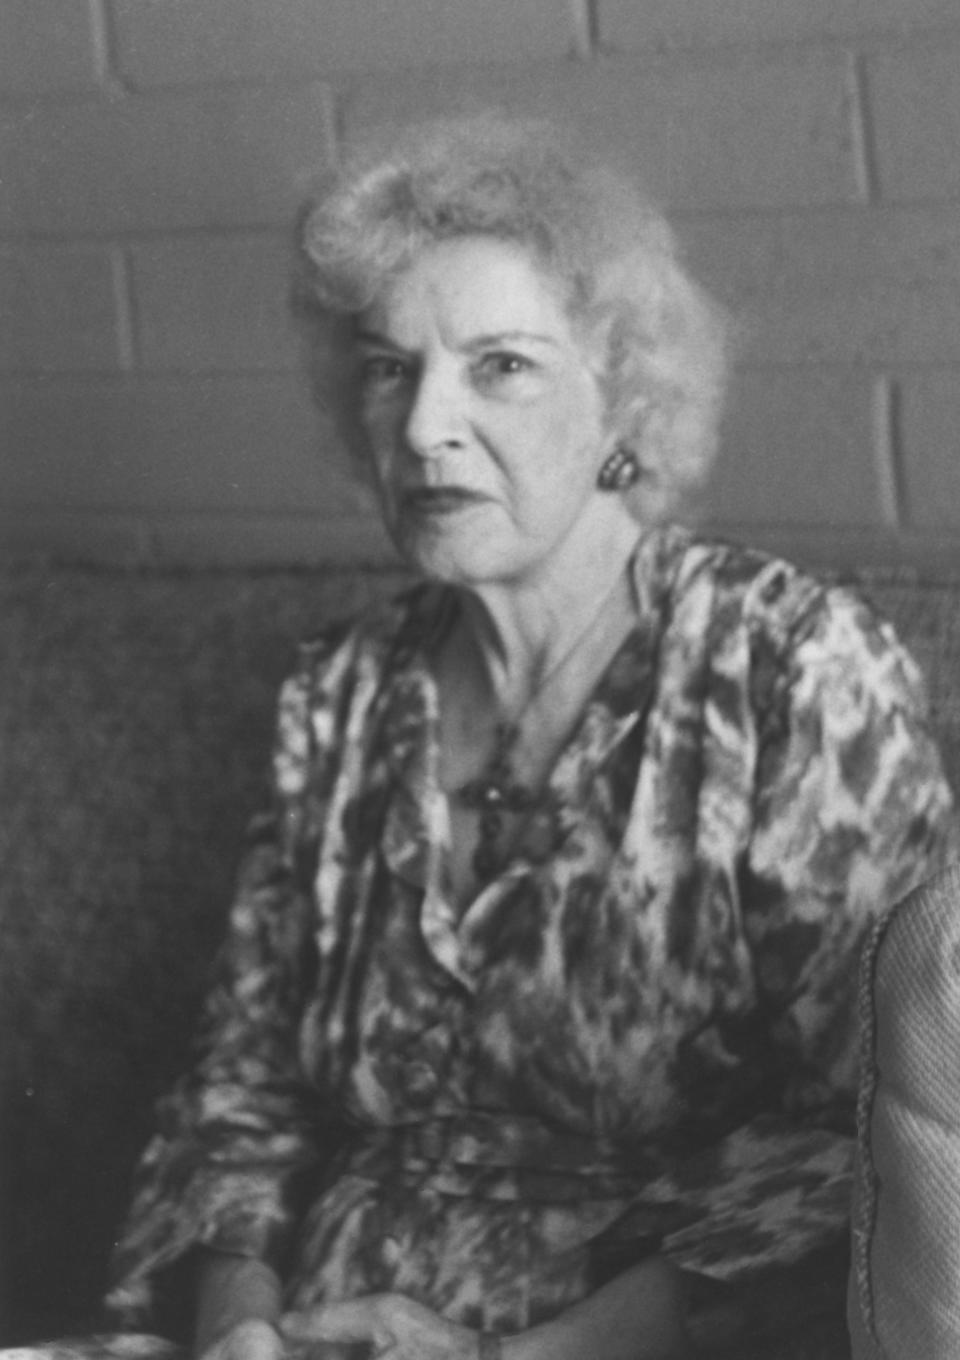 Clara Clemens, daughter of Mark Twain, pictured at age 85 in 1959 in San Diego, California.